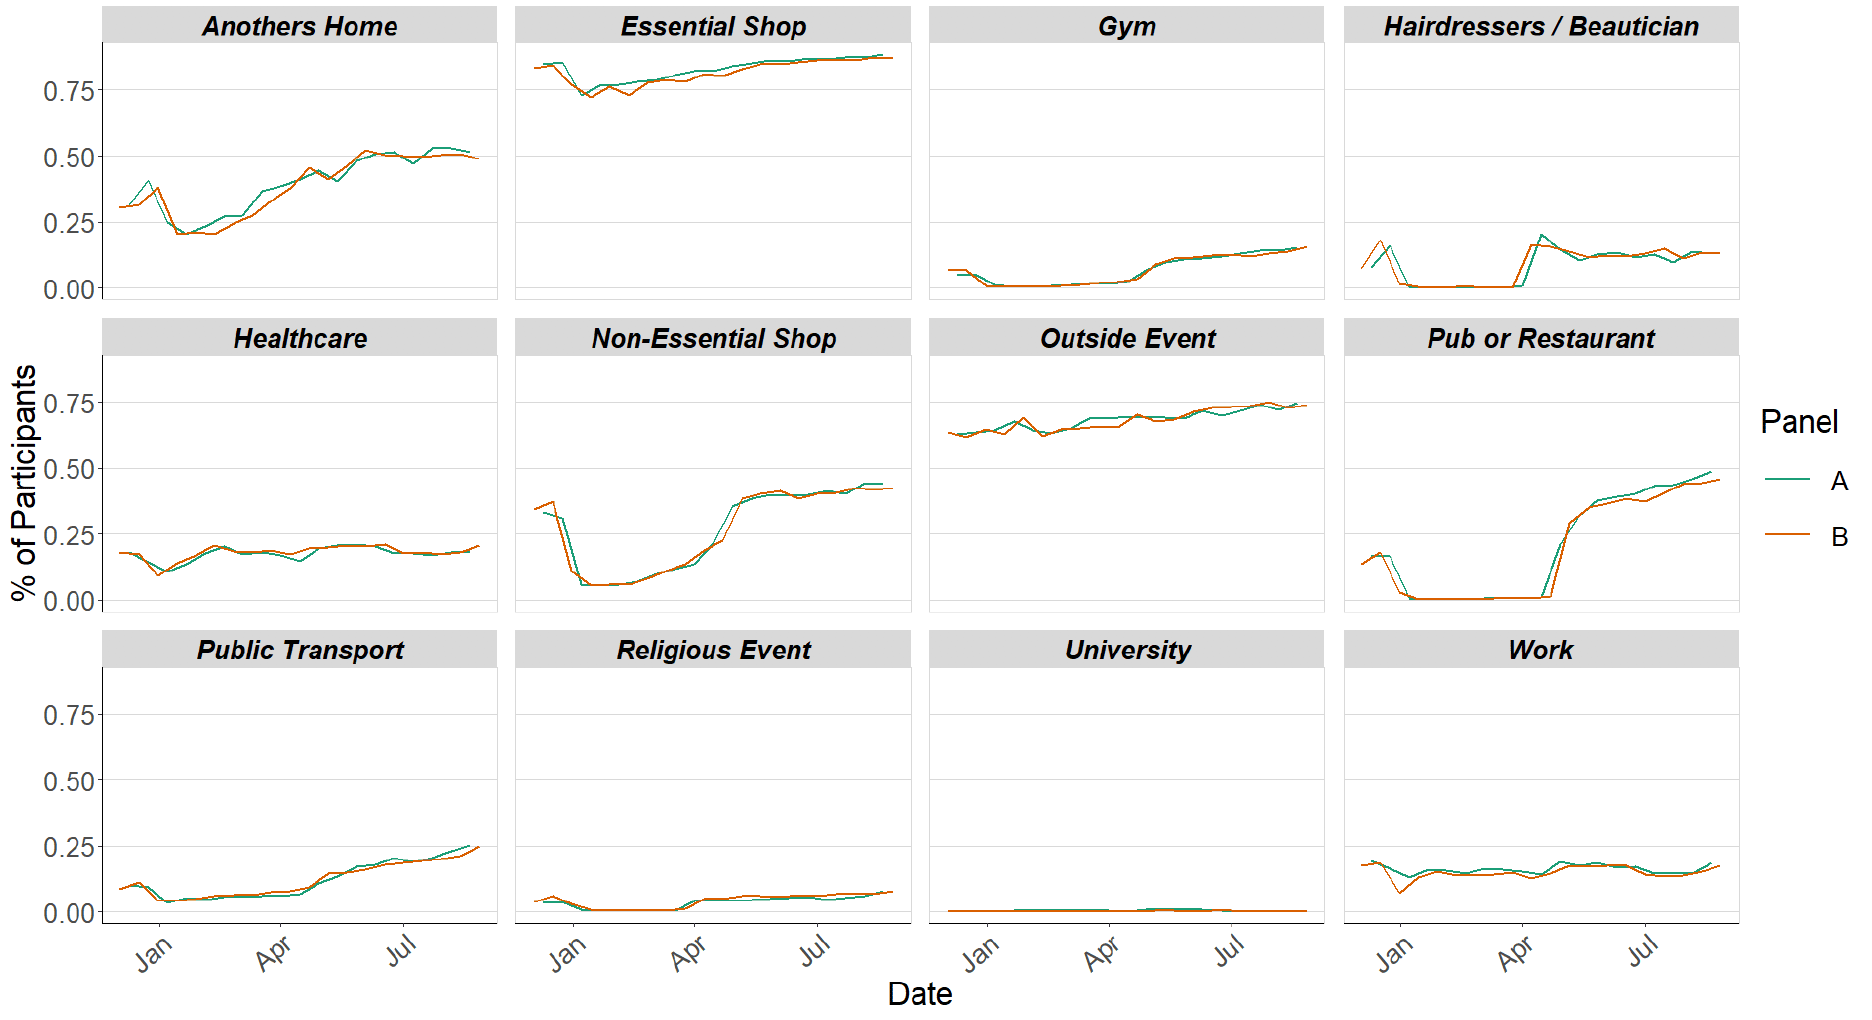 Figure 7. A series of line graphs showing locations visited by participants at least once for panel A and B in various settings.